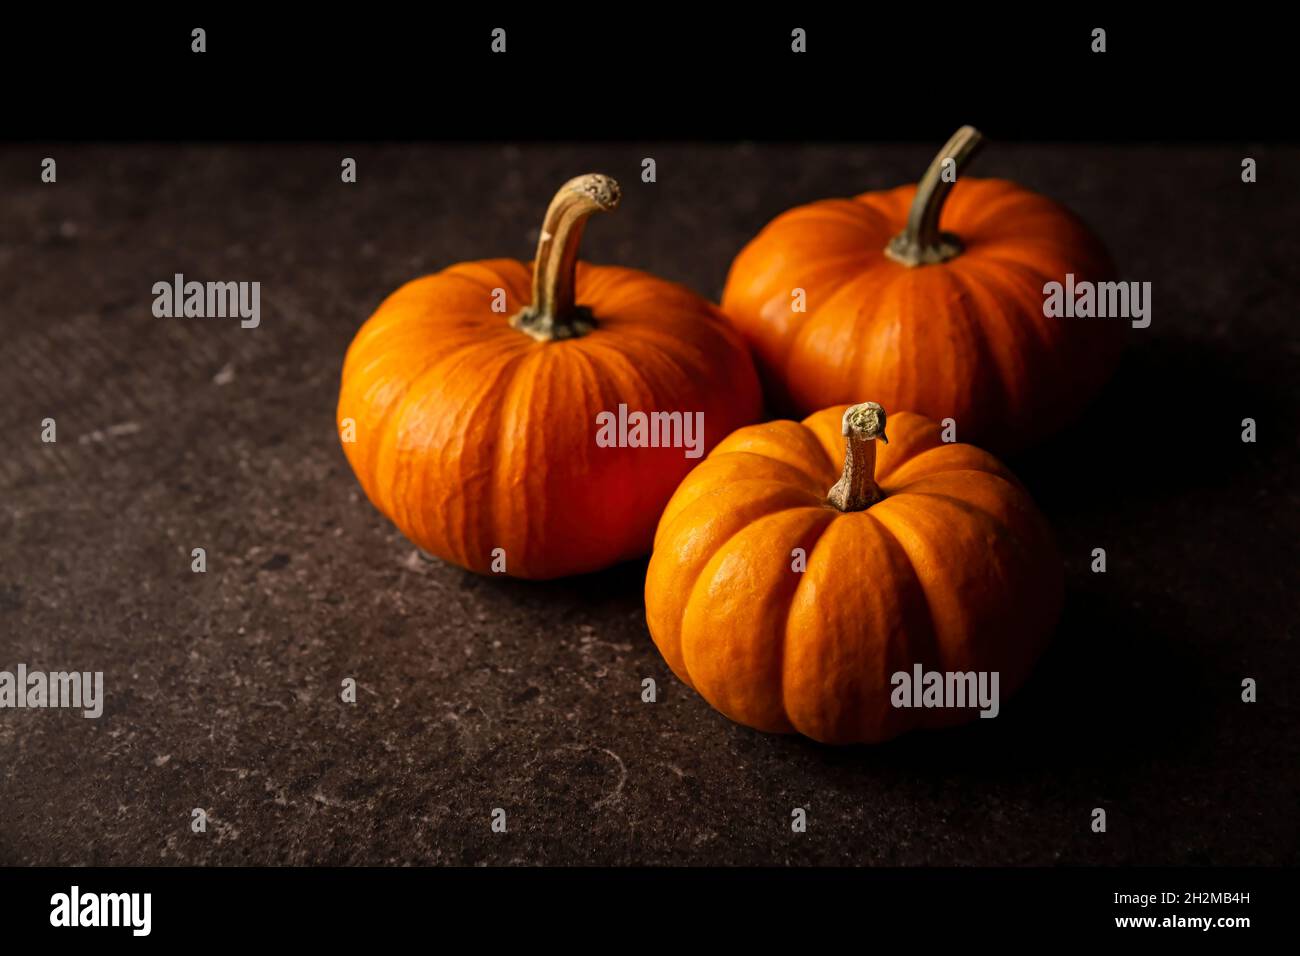 Small orange pumpkins with black background. Pumpkins are widely grown for commercial use and as food, aesthetics, and recreational purposes. Much con Stock Photo